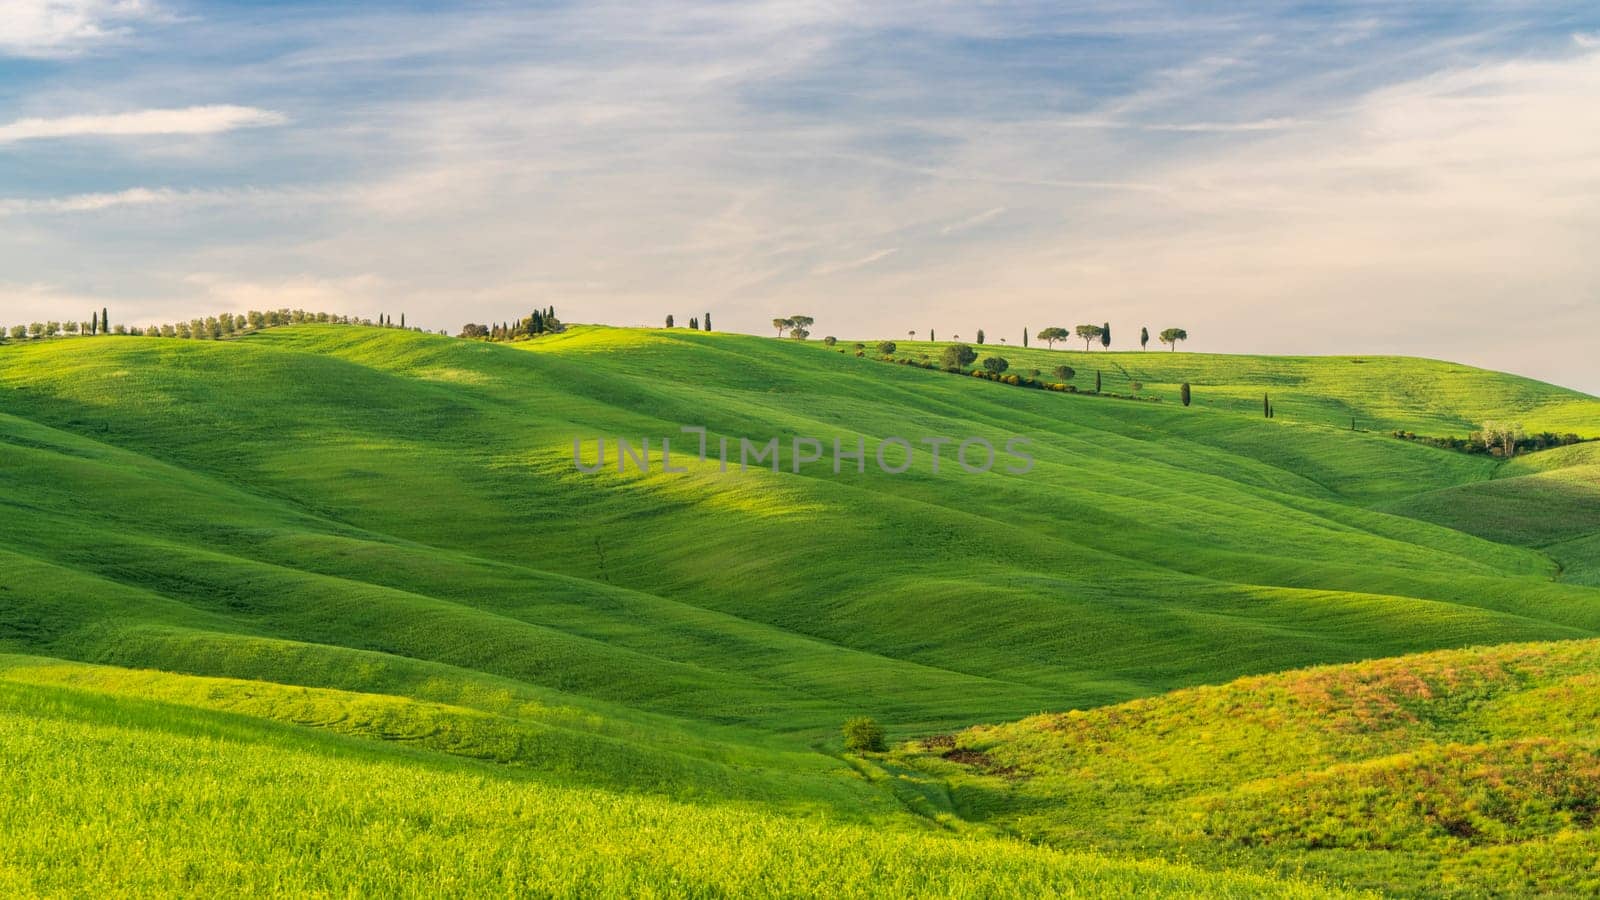 Hills of Tuscany. Val d'Orcia landscape in spring. Cypresses, hills and green meadows